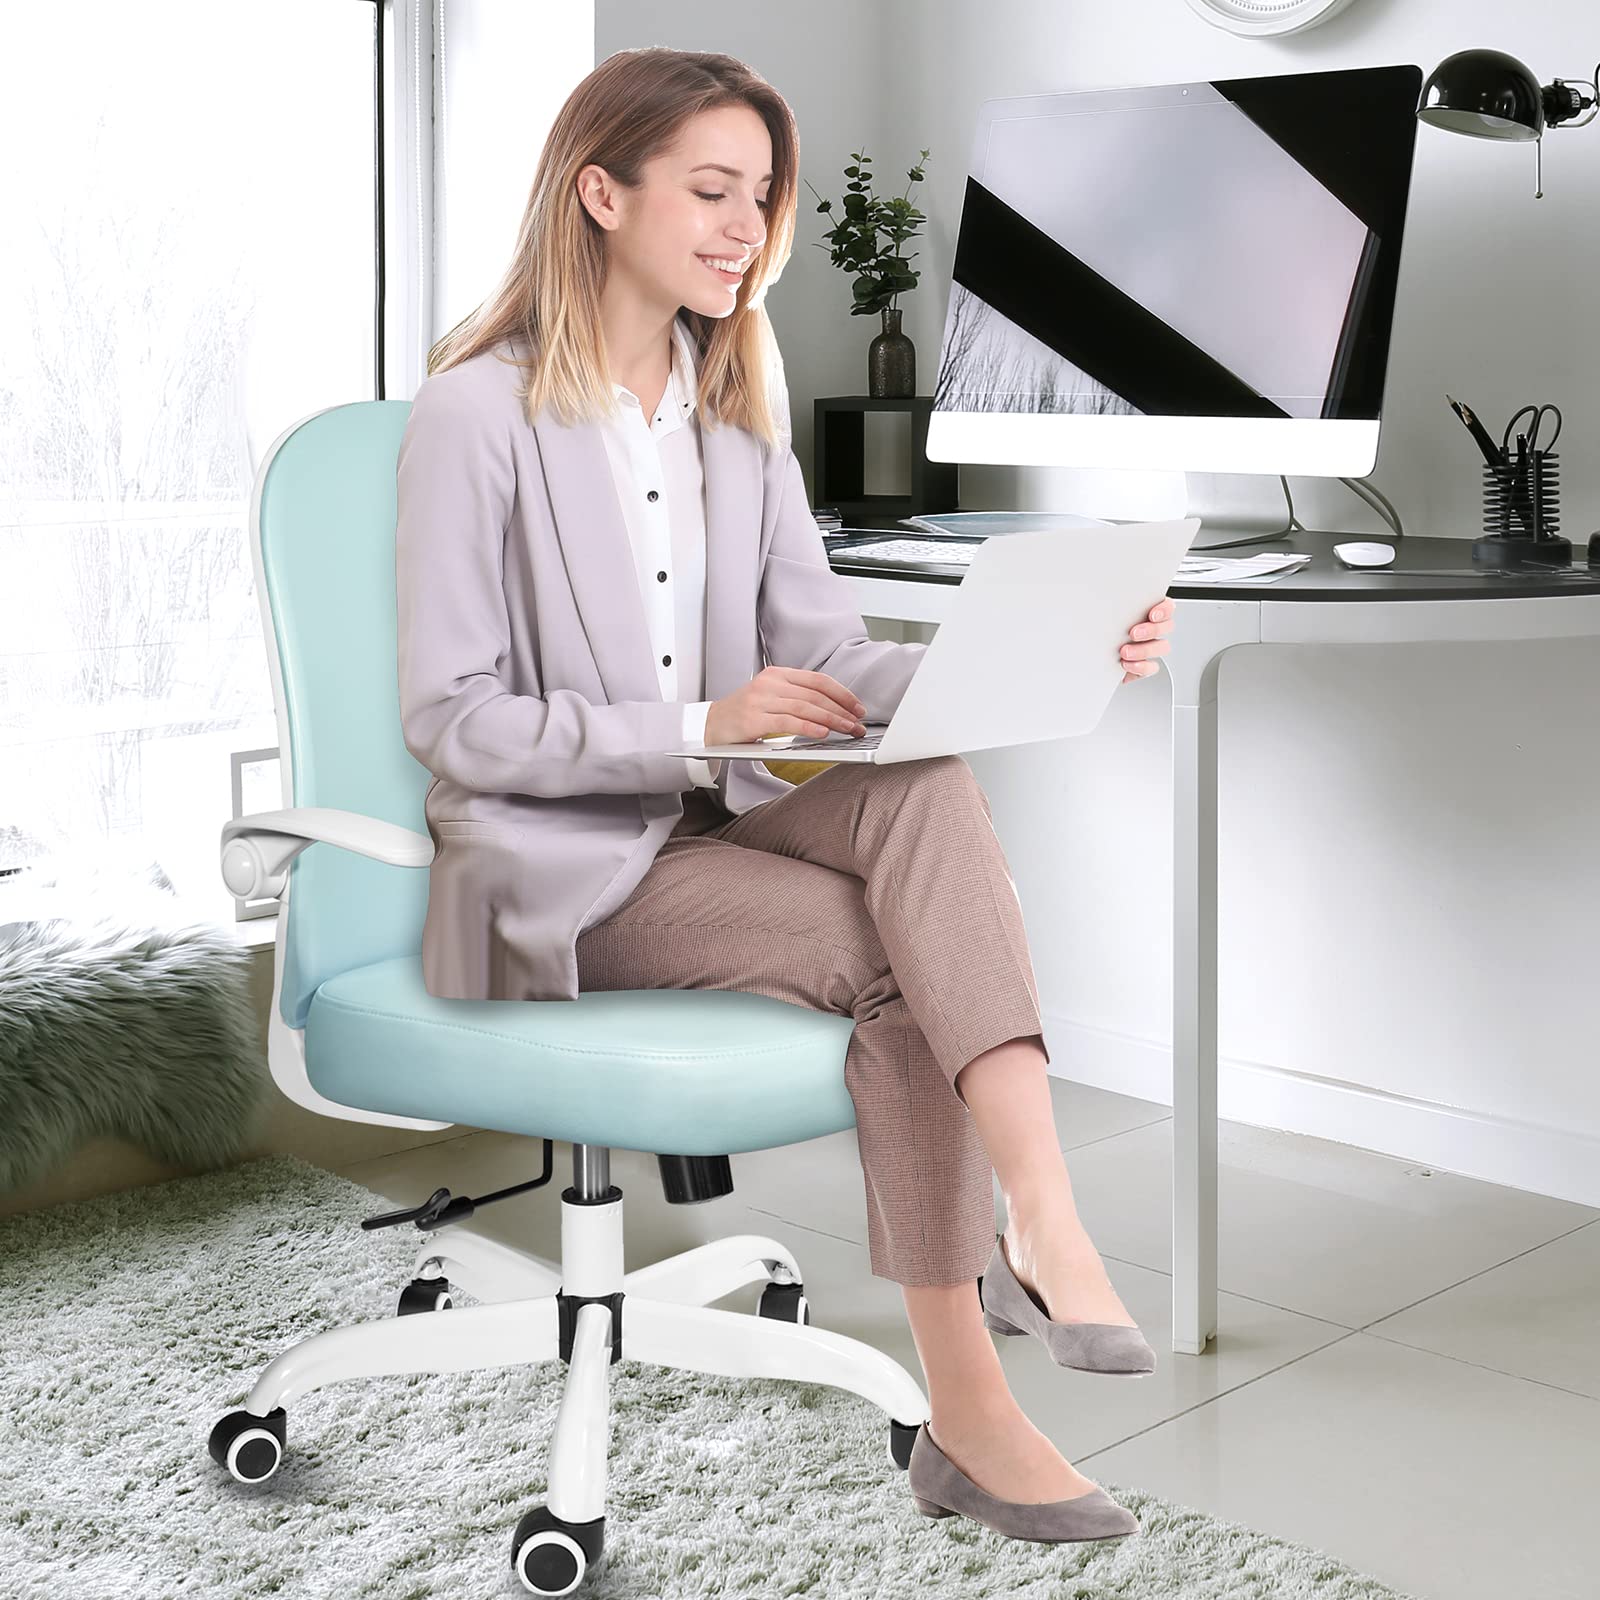 Ollega Desk Chairs with Wheels and Arms, Blue Office Chair for Small Space, Ergonomic Leather Office Chair Adjustable Height and Swivel Lumbar Support, Small Desk Chair with Flip Up Armrests